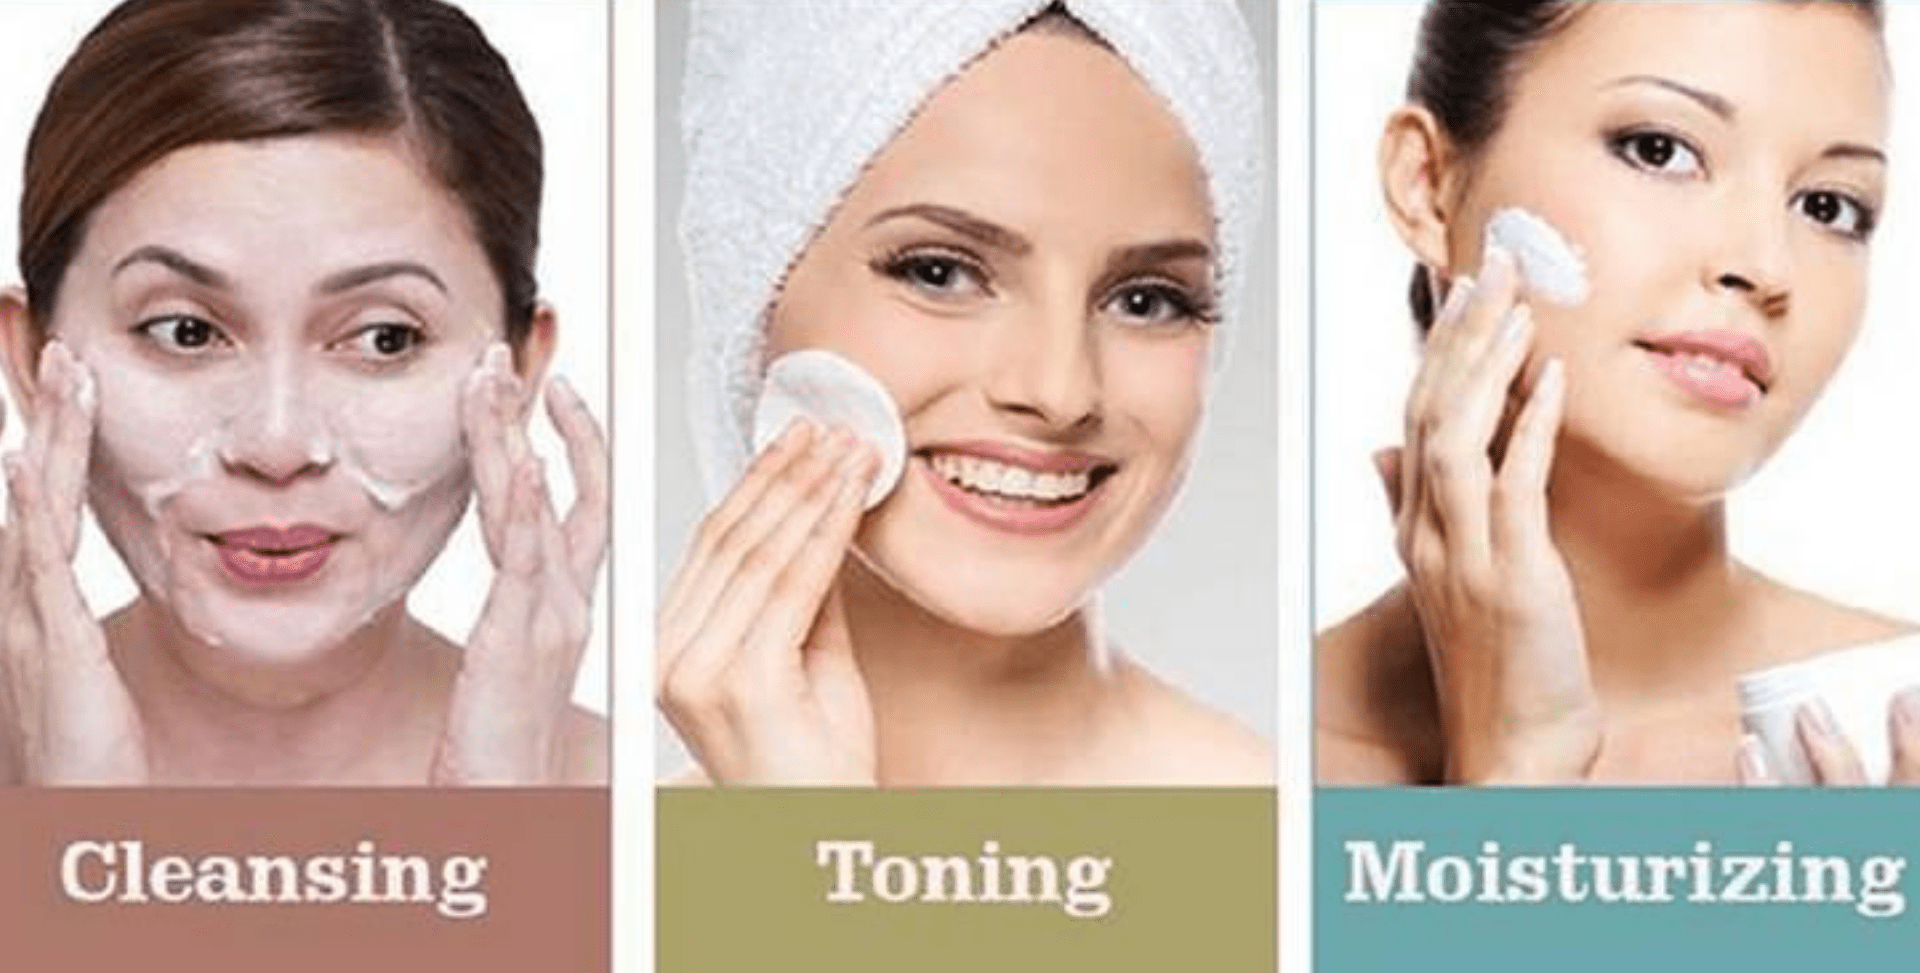 Bridal pre wedding skin care routine at home for glowing skin